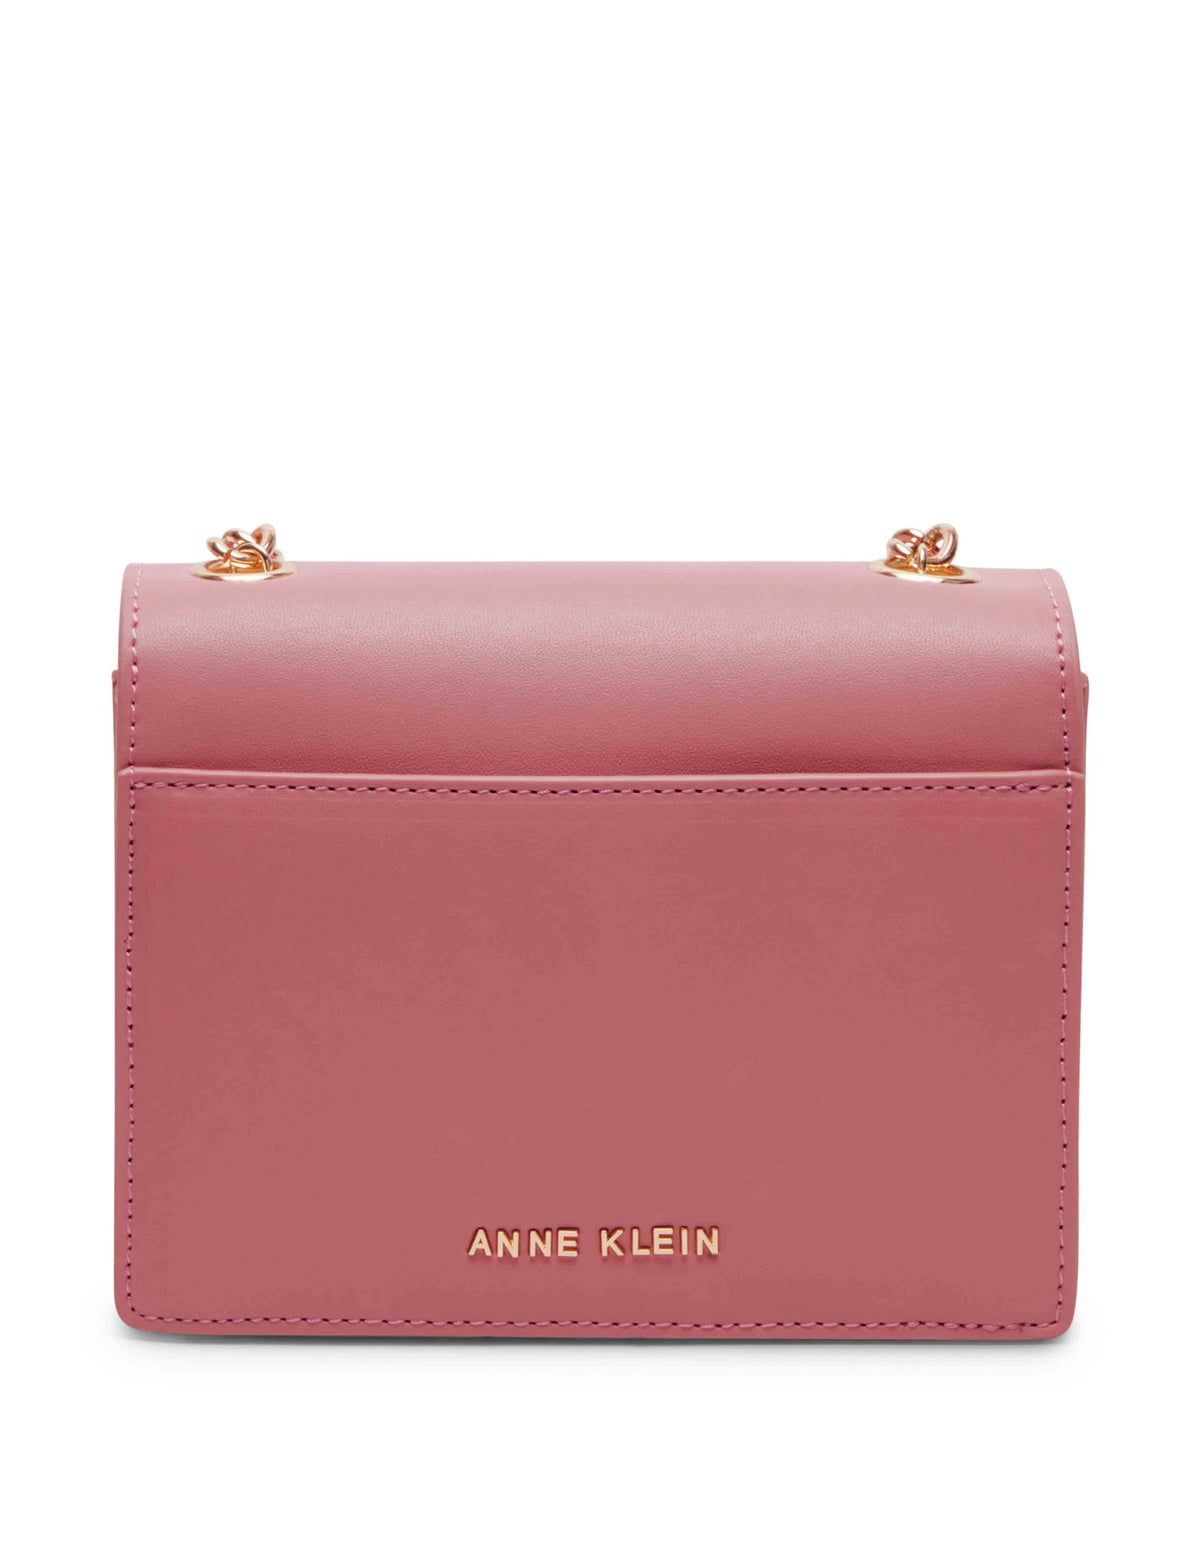 Anne Klein  Square Flap Crossbody With Floral Applique